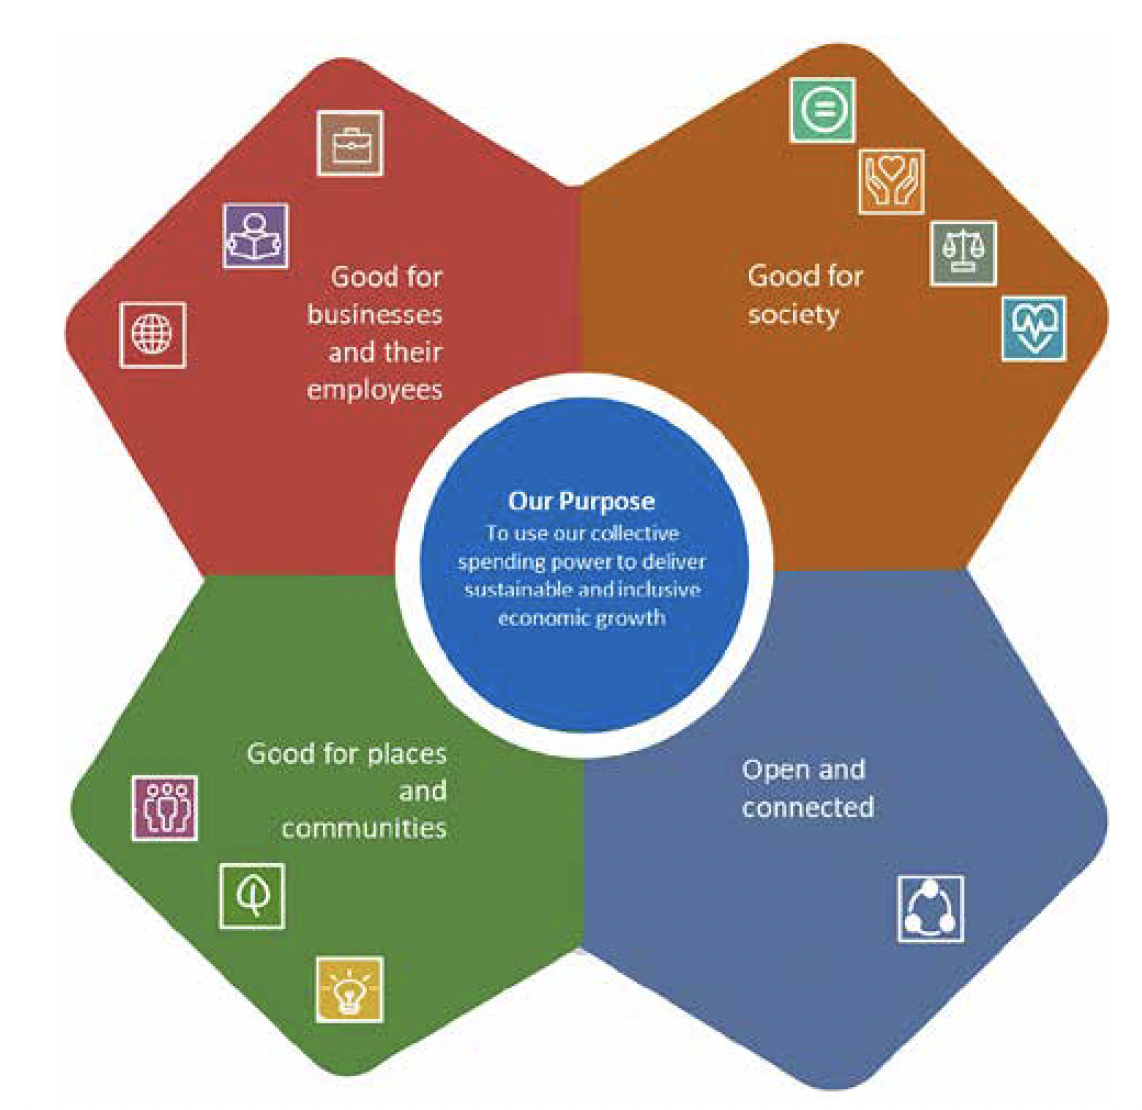 Visual diagram of the four outcomes of Scottish public sector procurement – Good for businesses and their employees, Good for society, Good for places and communities and Open and Connected. Including Our Purpose at the centre: To use our collective spending power to deliver sustainable and inclusive economic growth.